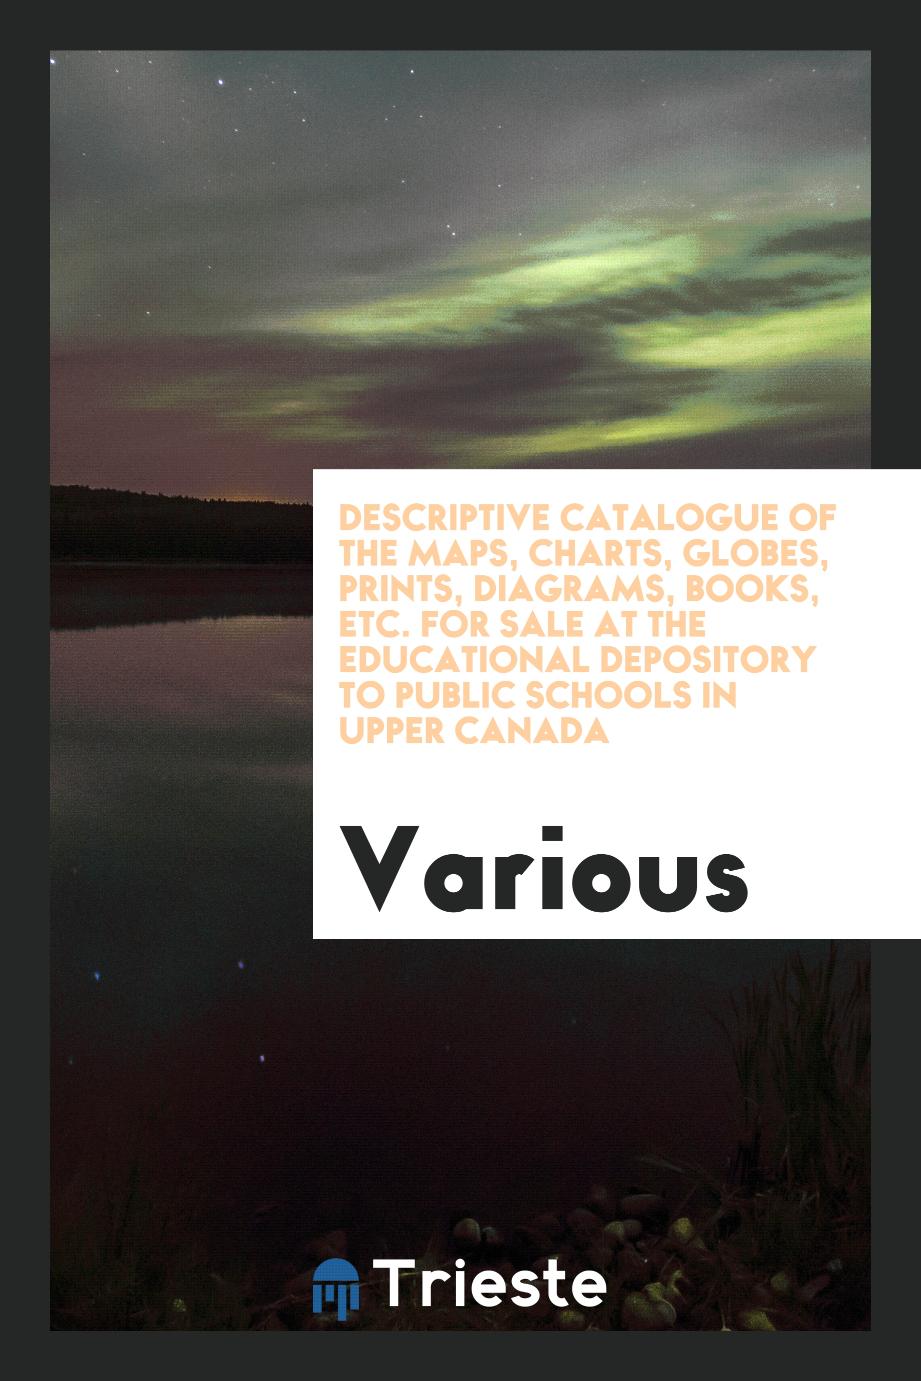 Descriptive Catalogue of the Maps, Charts, Globes, Prints, Diagrams, Books, Etc. For Sale at the Educational Depository to Public Schools in Upper Canada